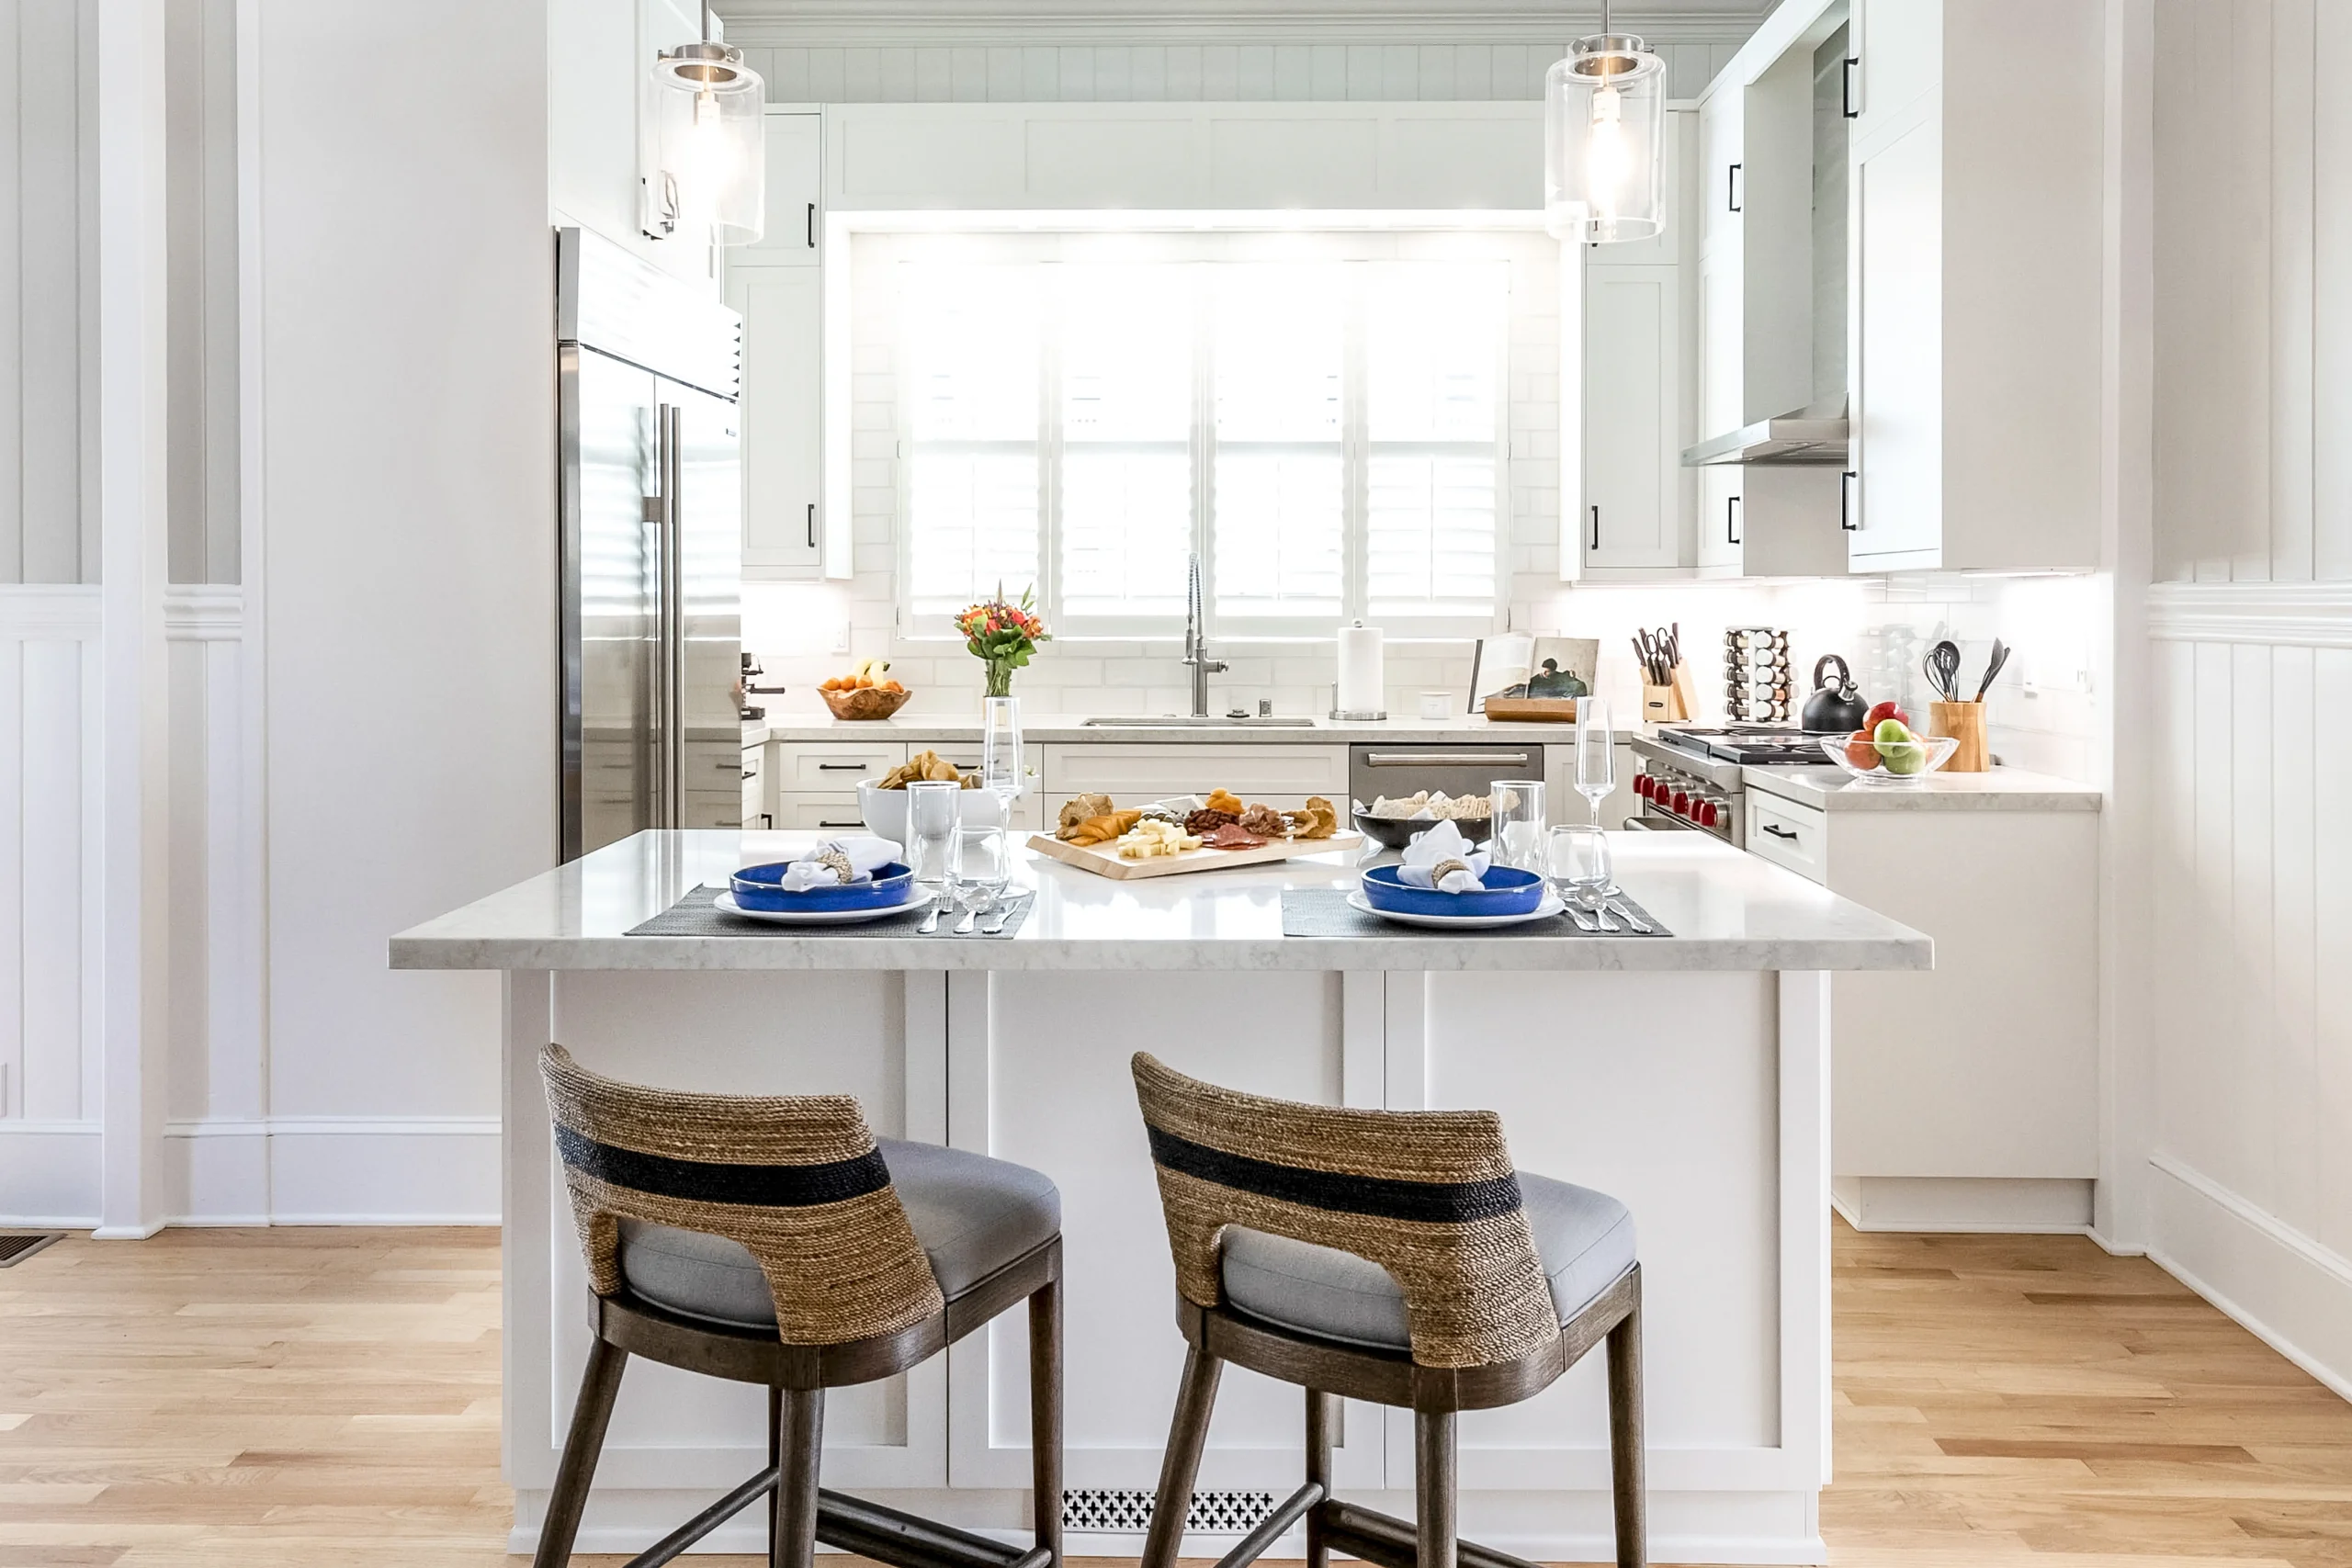 kitchen island with bar stools and placesettings